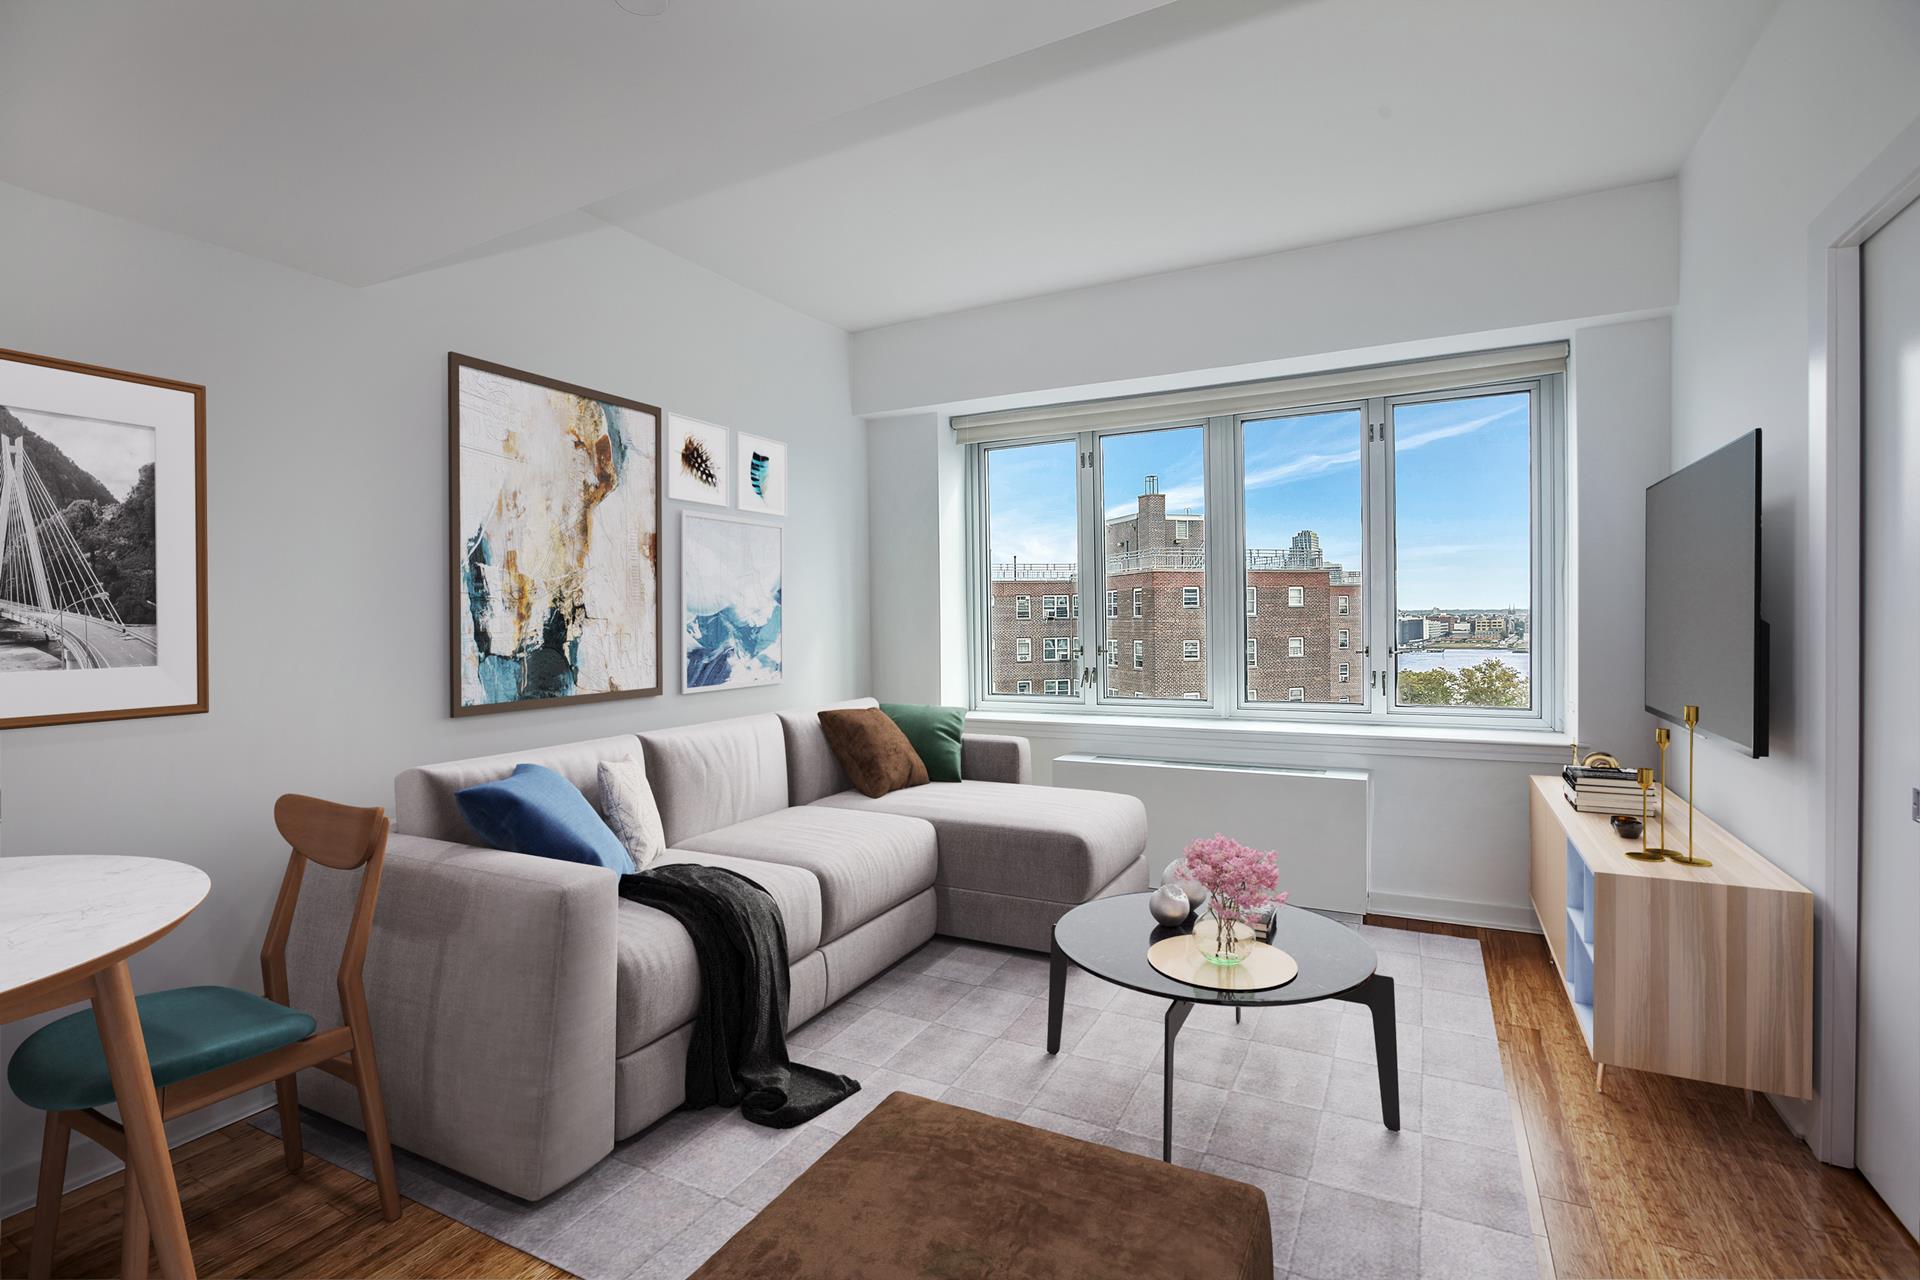 101 Ave D Ph12b, East Village, Downtown, NYC - 1 Bedrooms  
1 Bathrooms  
3 Rooms - 